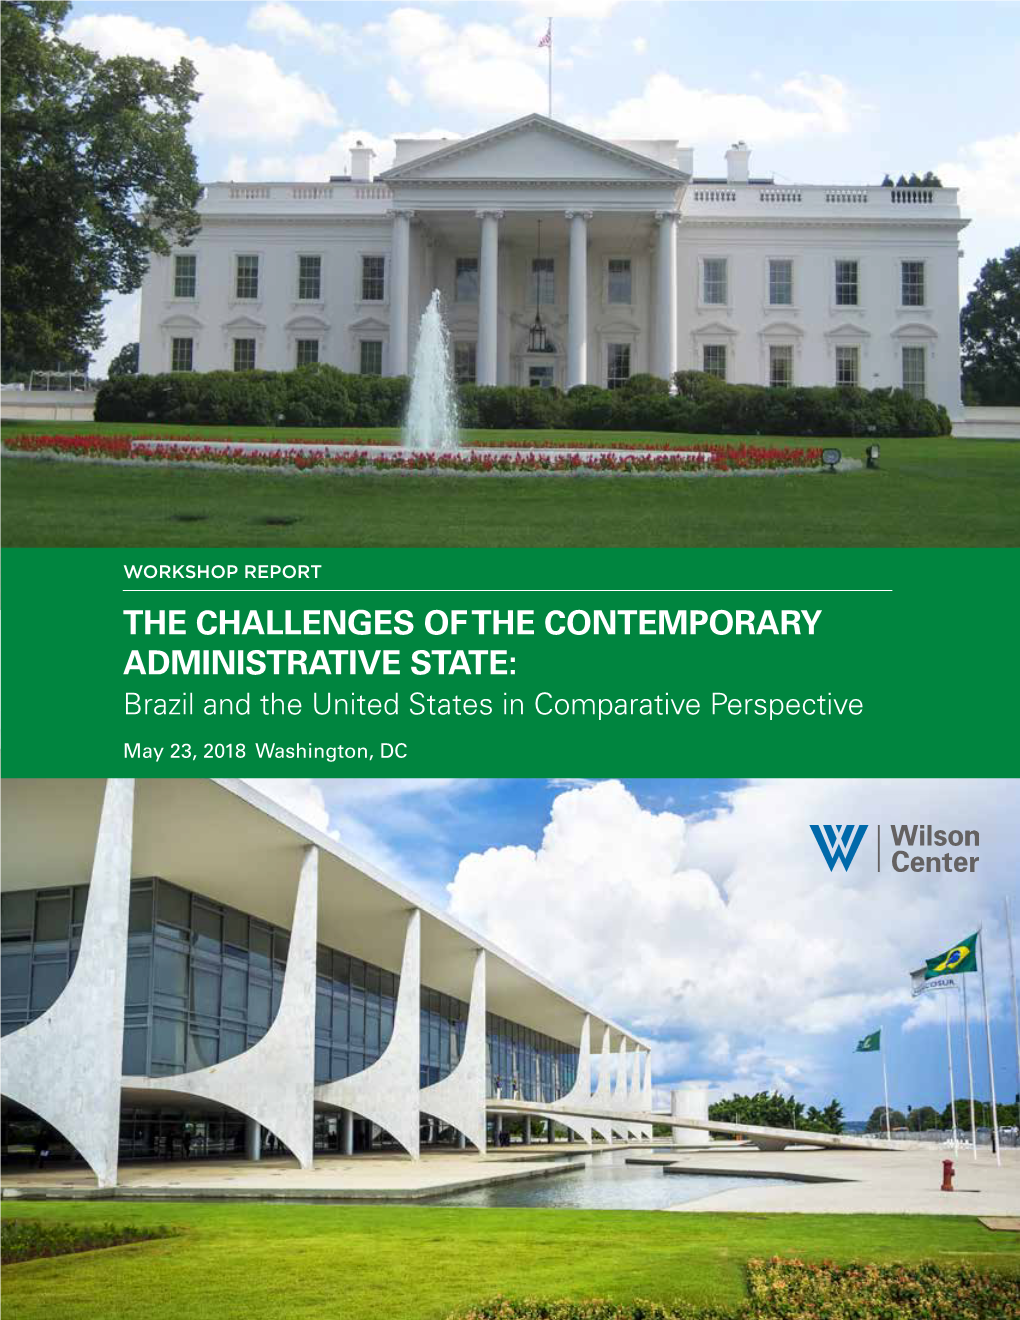 THE CHALLENGES of the CONTEMPORARY ADMINISTRATIVE STATE: Brazil and the United States in Comparative Perspective